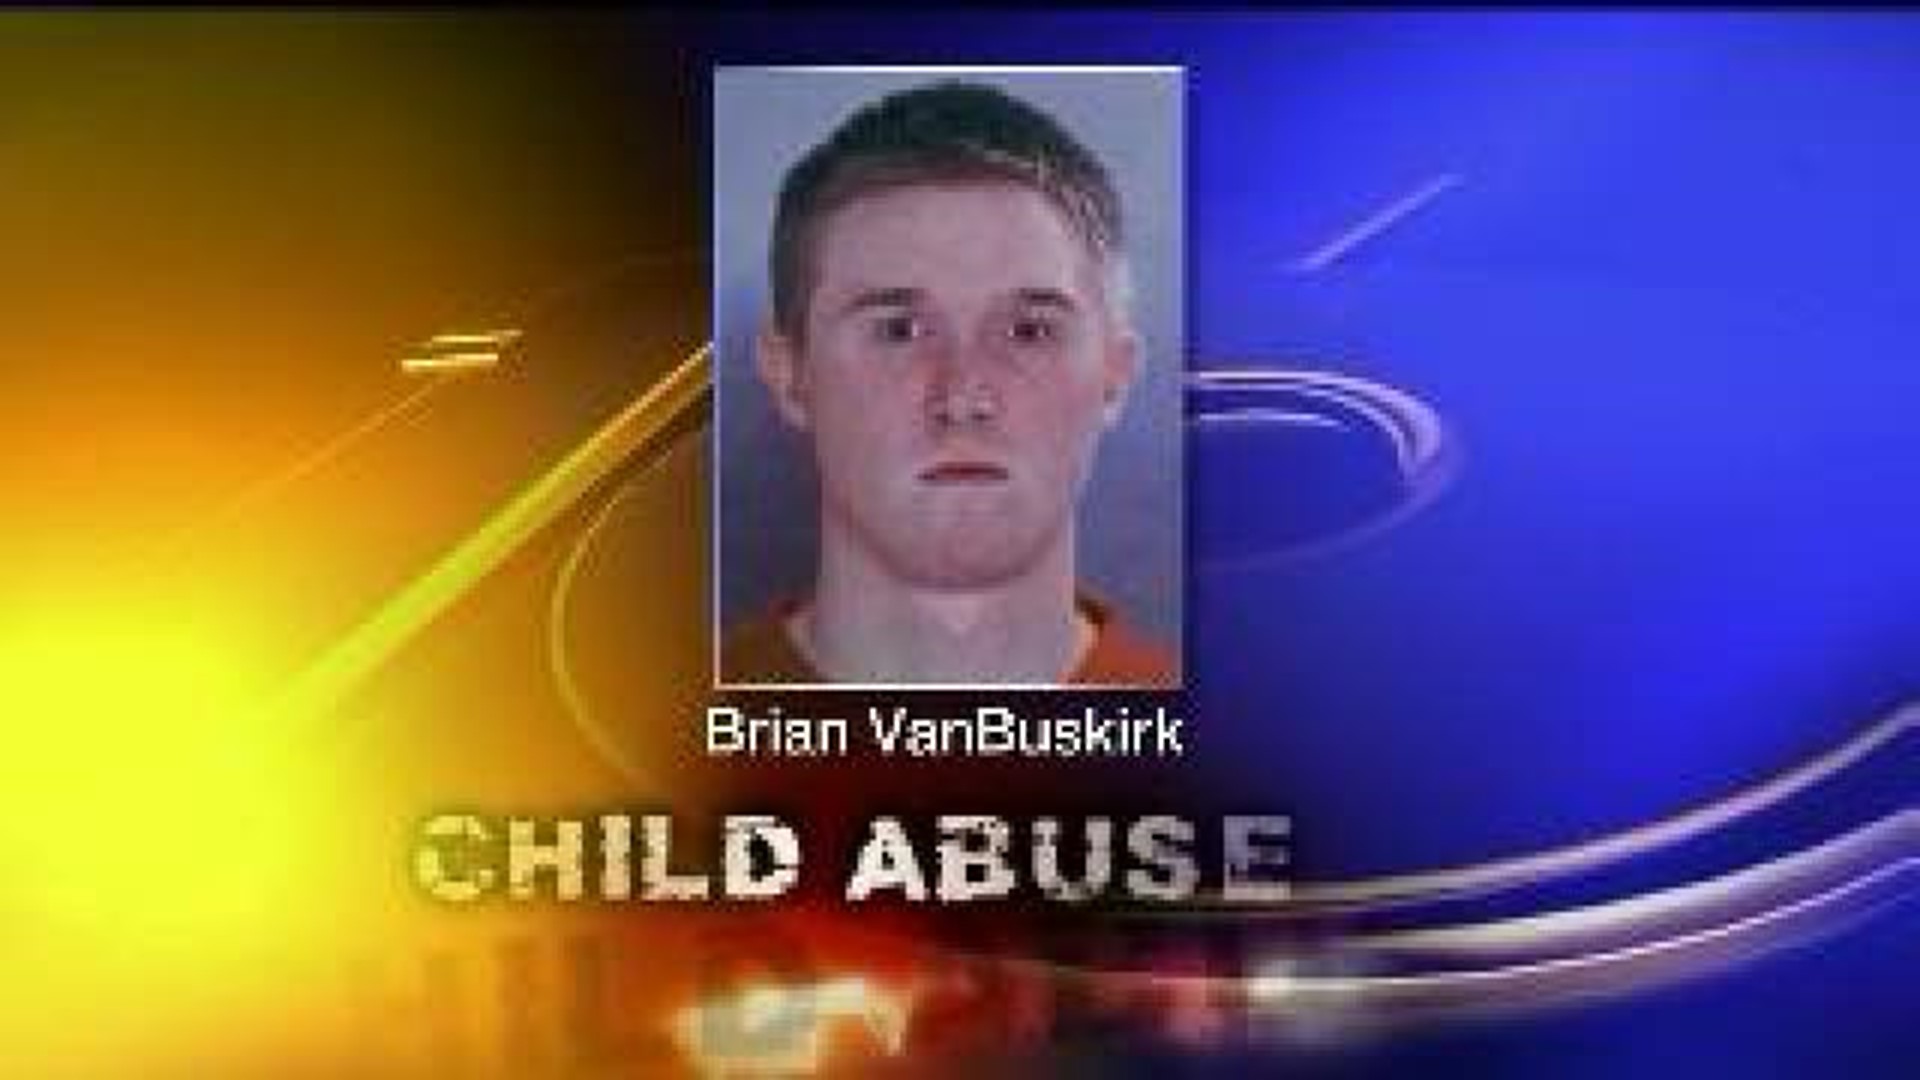 Two Men Charged With New Child Abuse Law